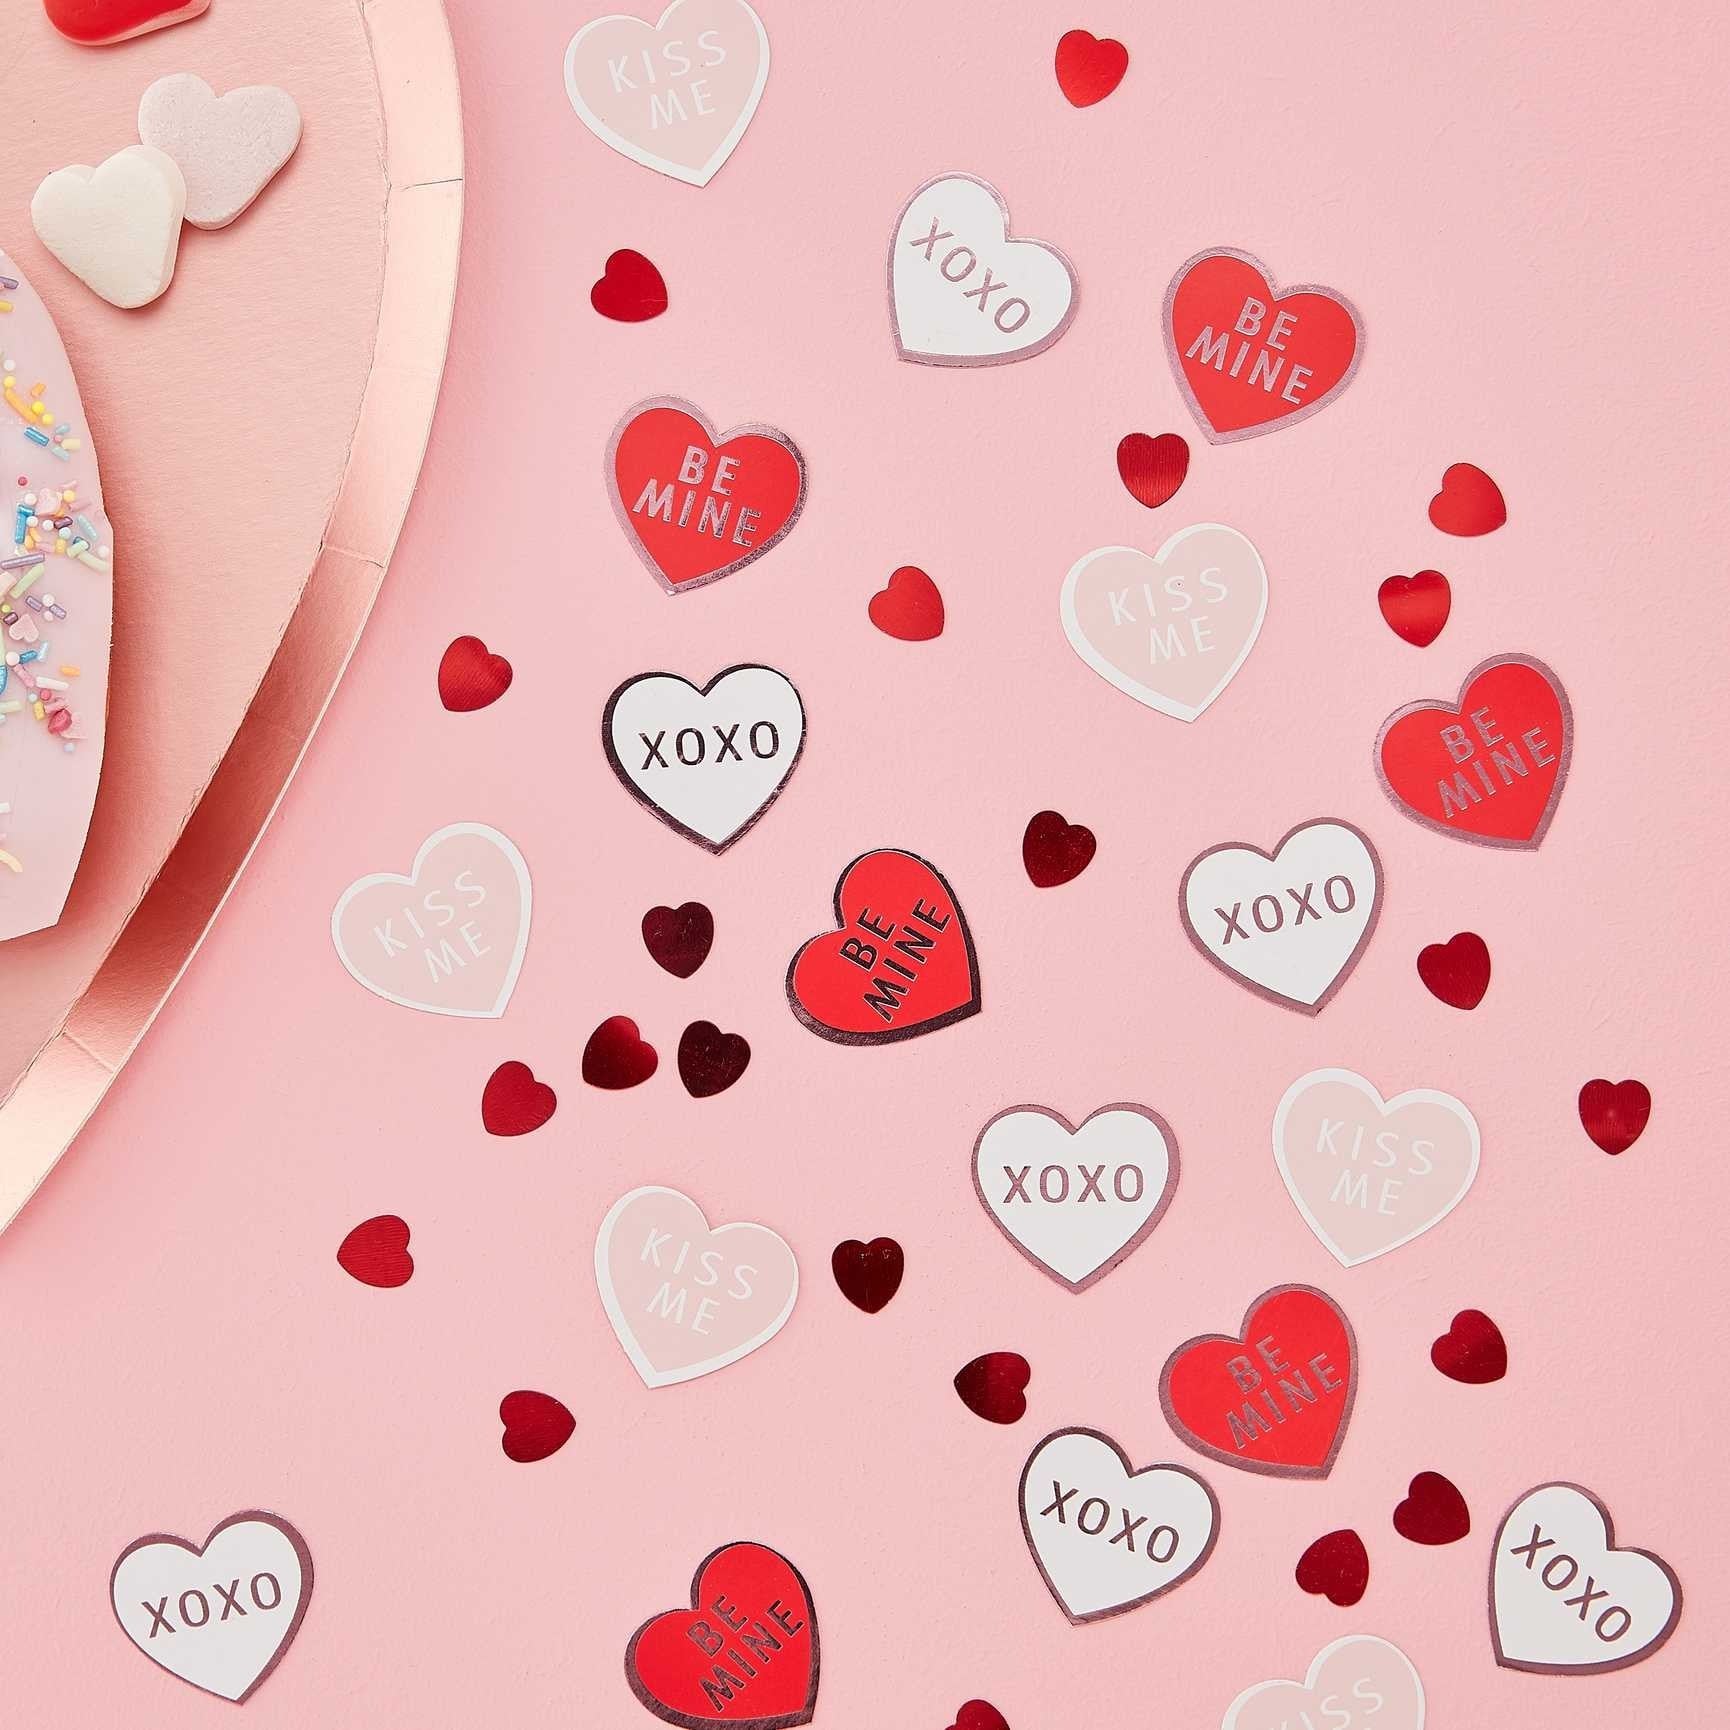 View Heart Shaped Confetti information